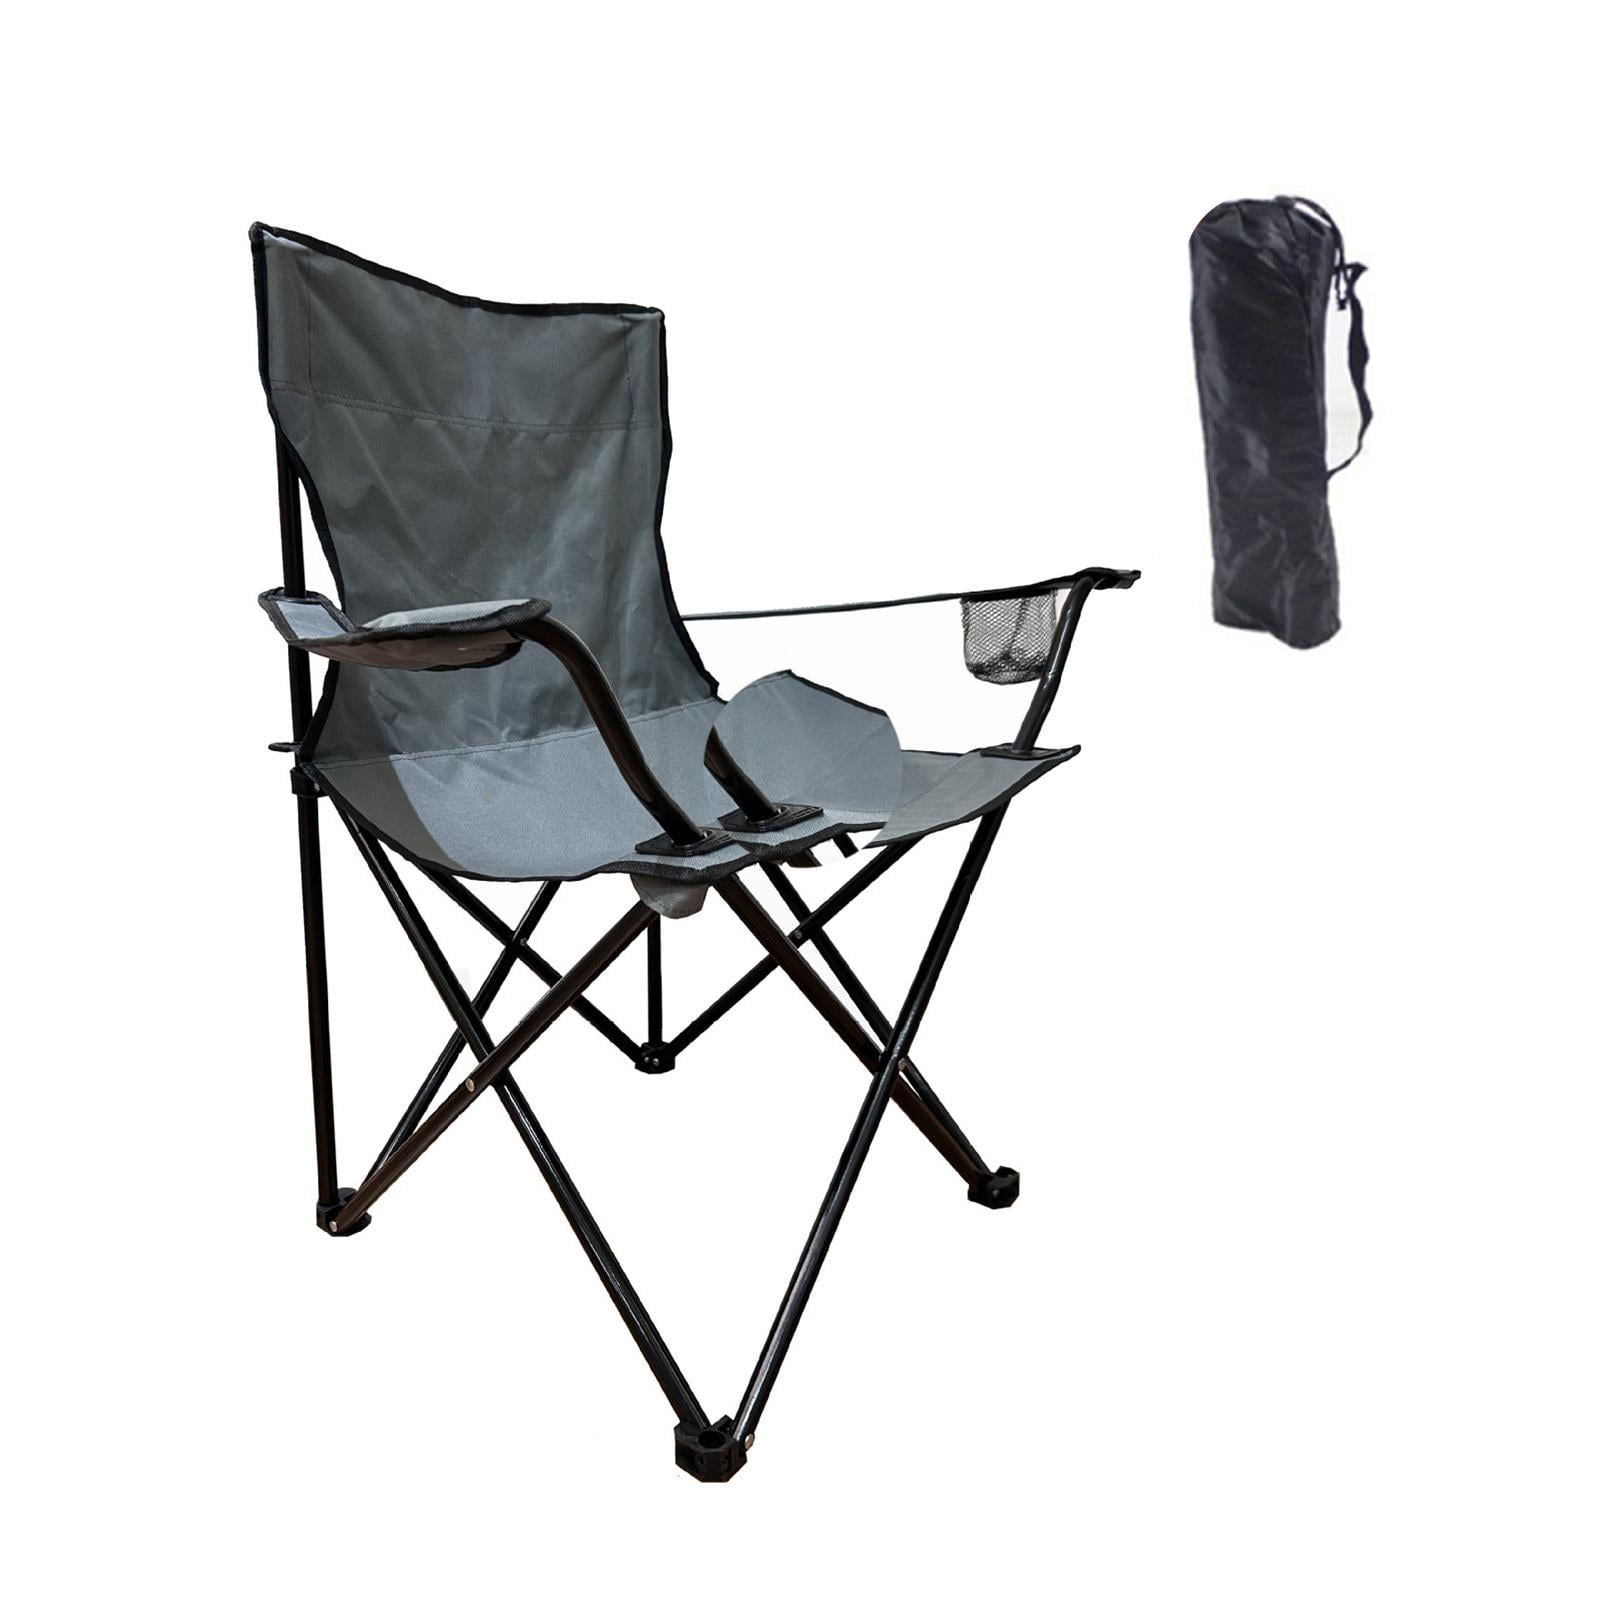 Camping Folding Chair Portable Camping Chairs with Carrying Bag Camp ...